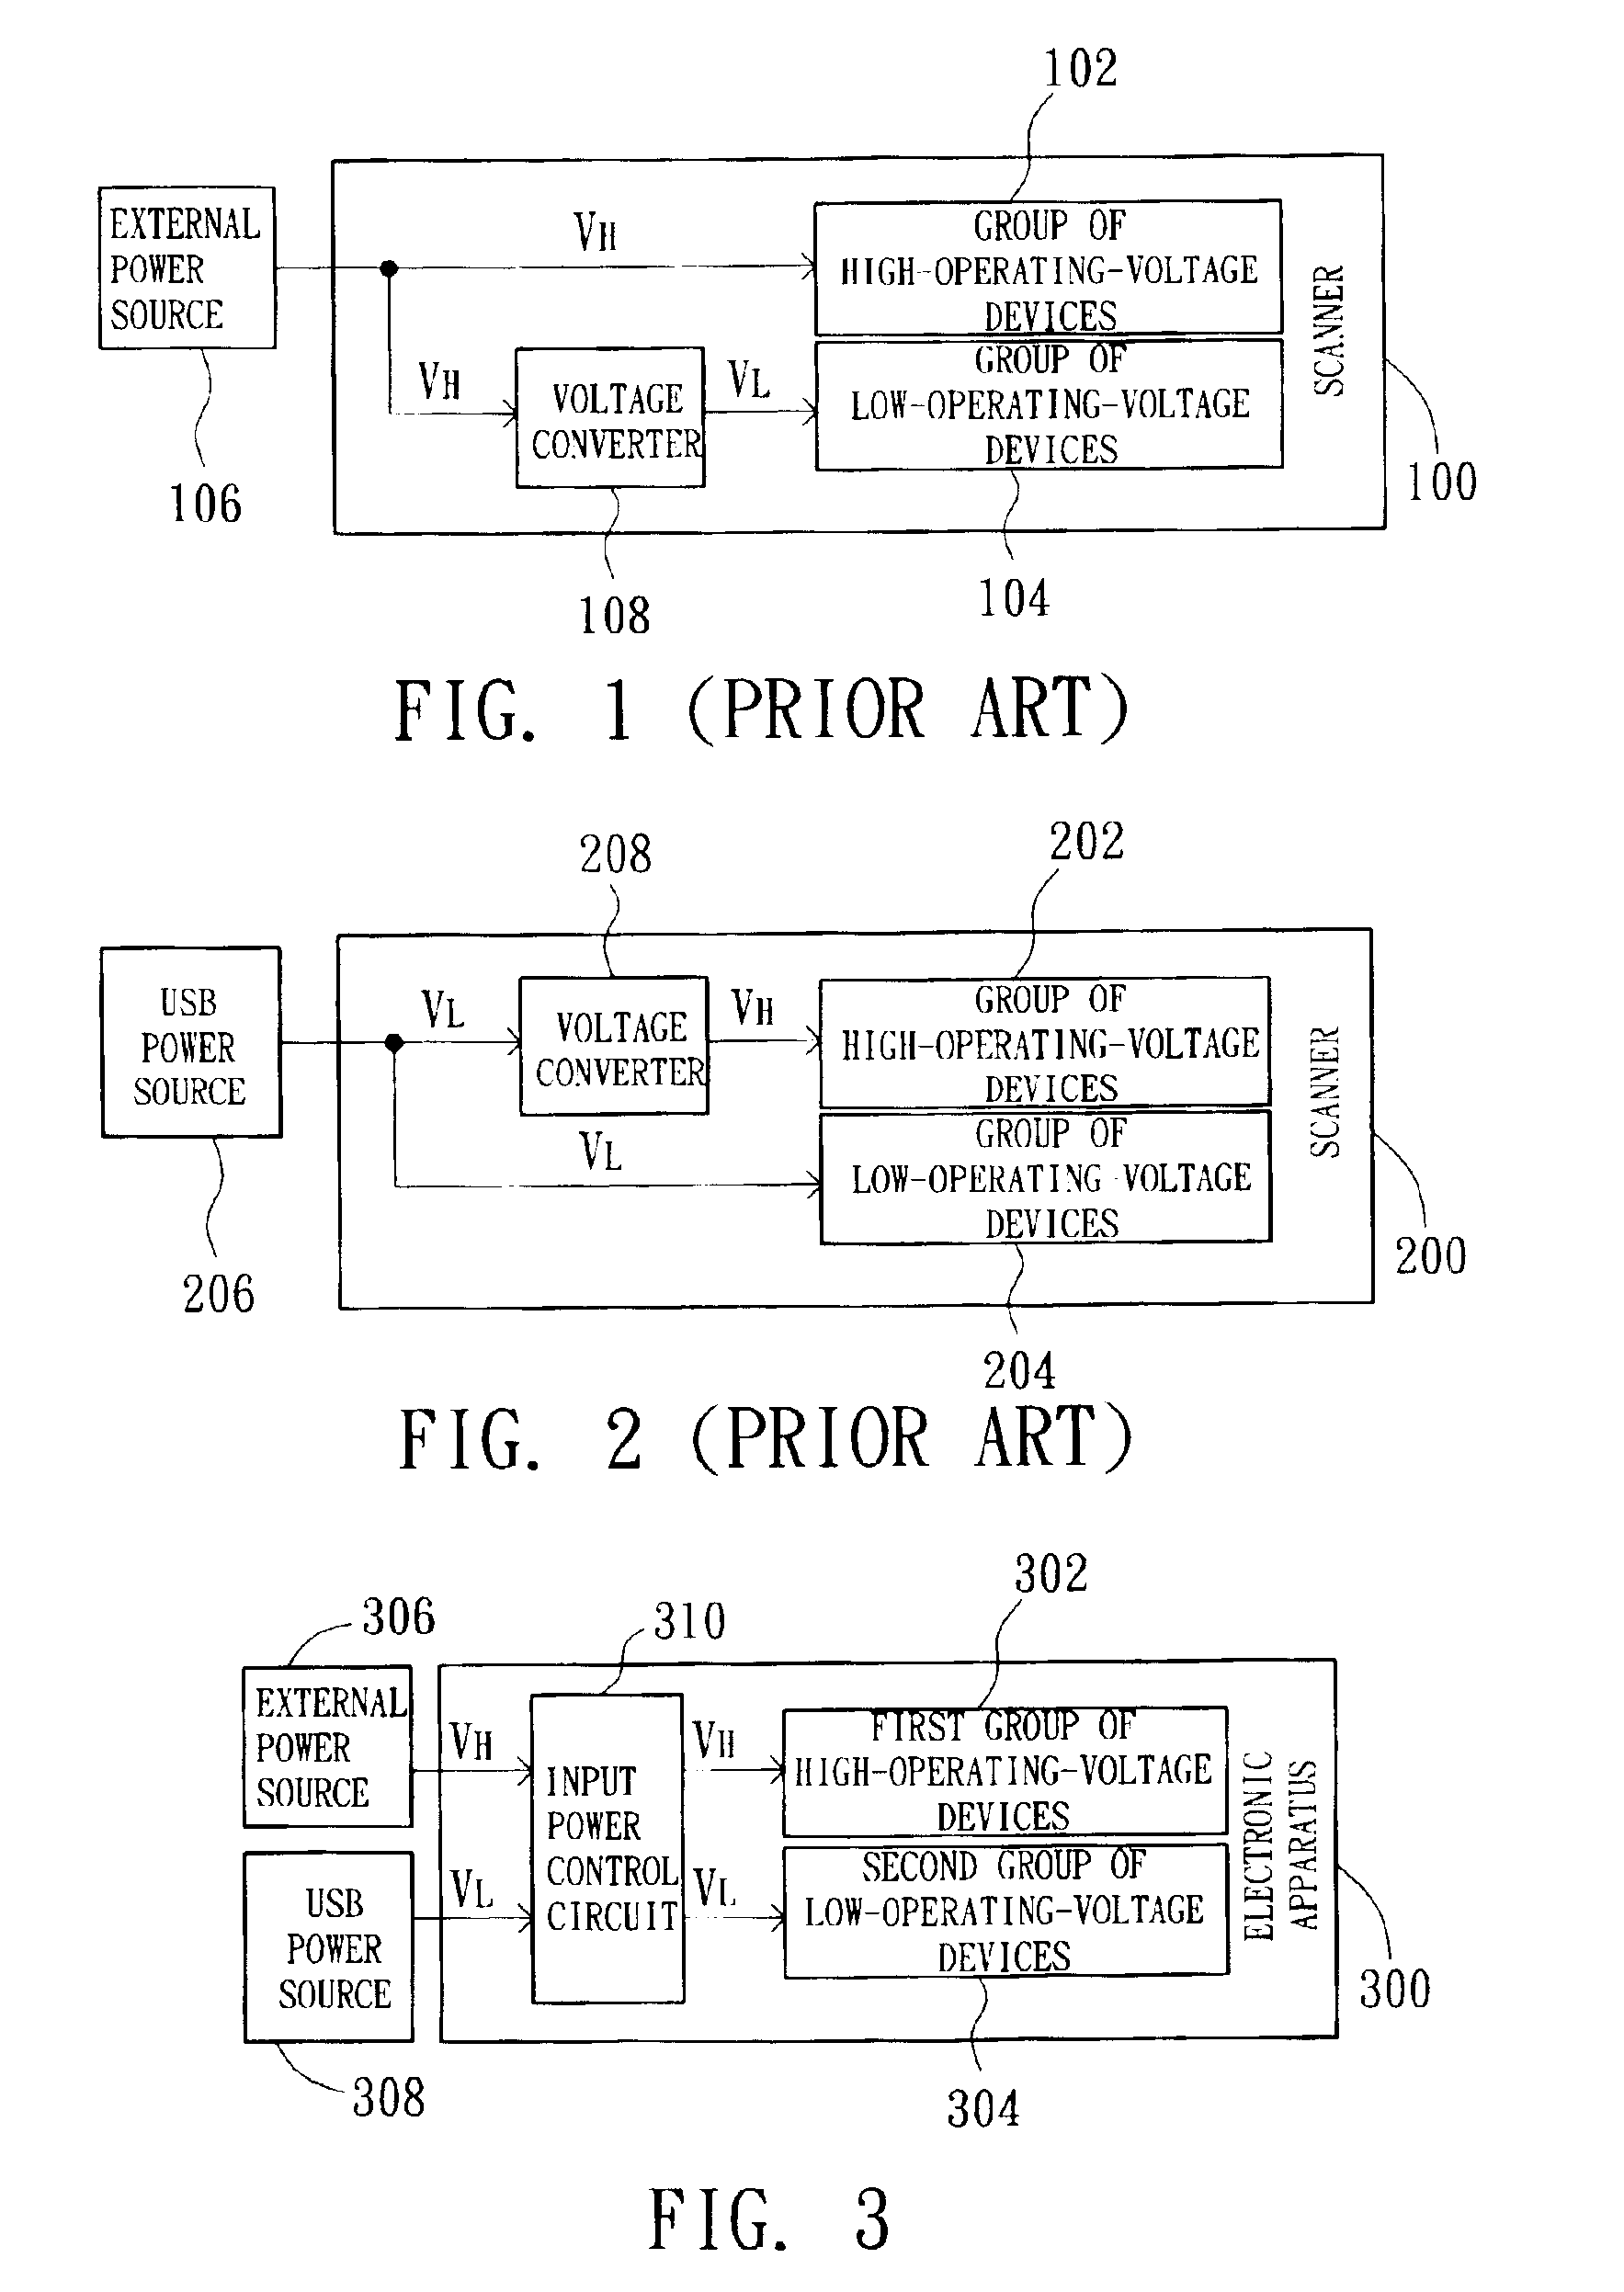 Electronic apparatus capable of using an external power source and a bus power source simultaneously